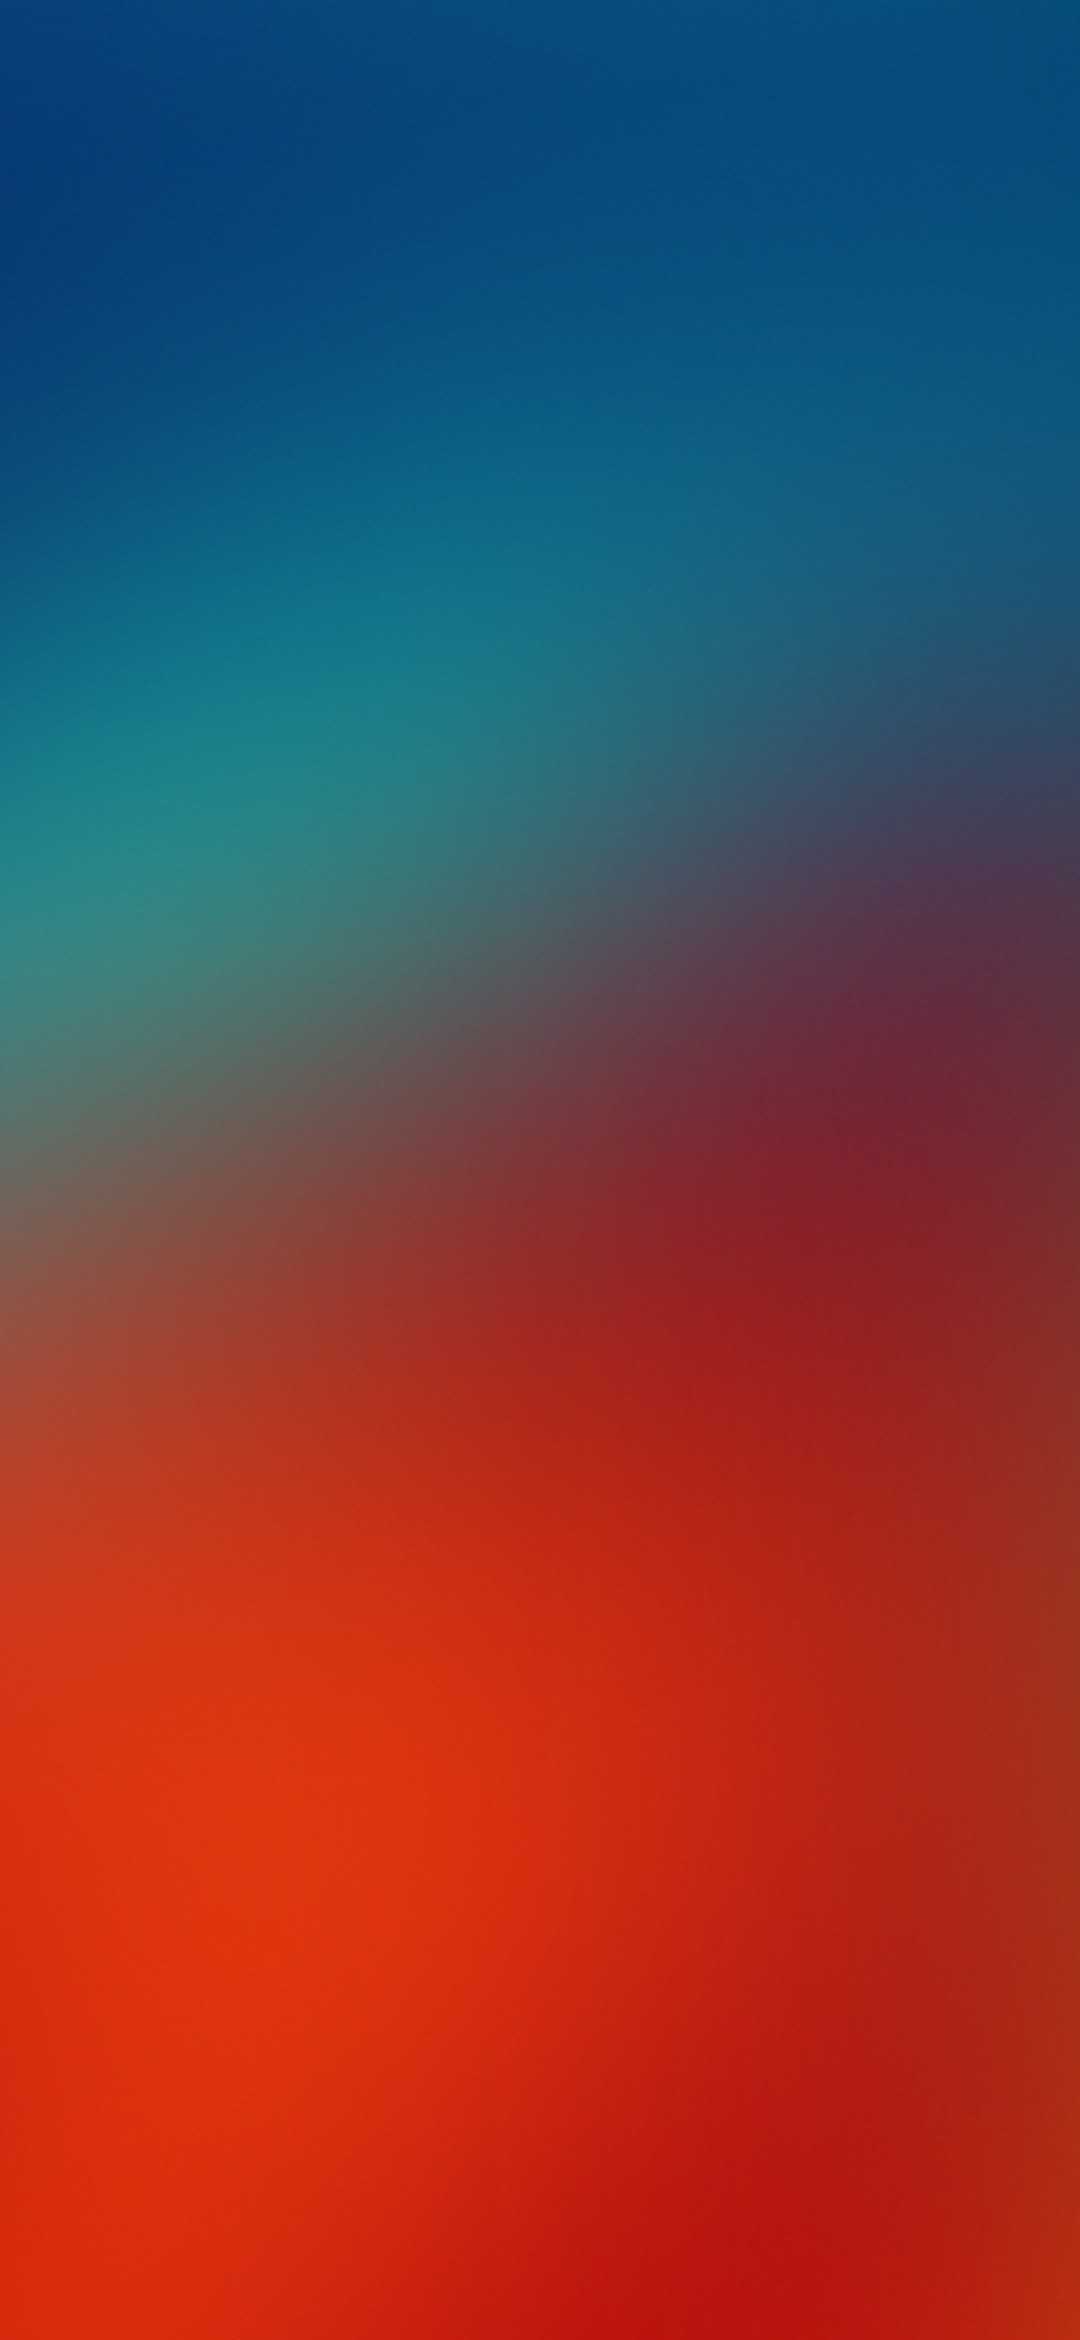 Lenovo Z6 Pro Wallpapers (Full HD+) - Download Now | DroidViews